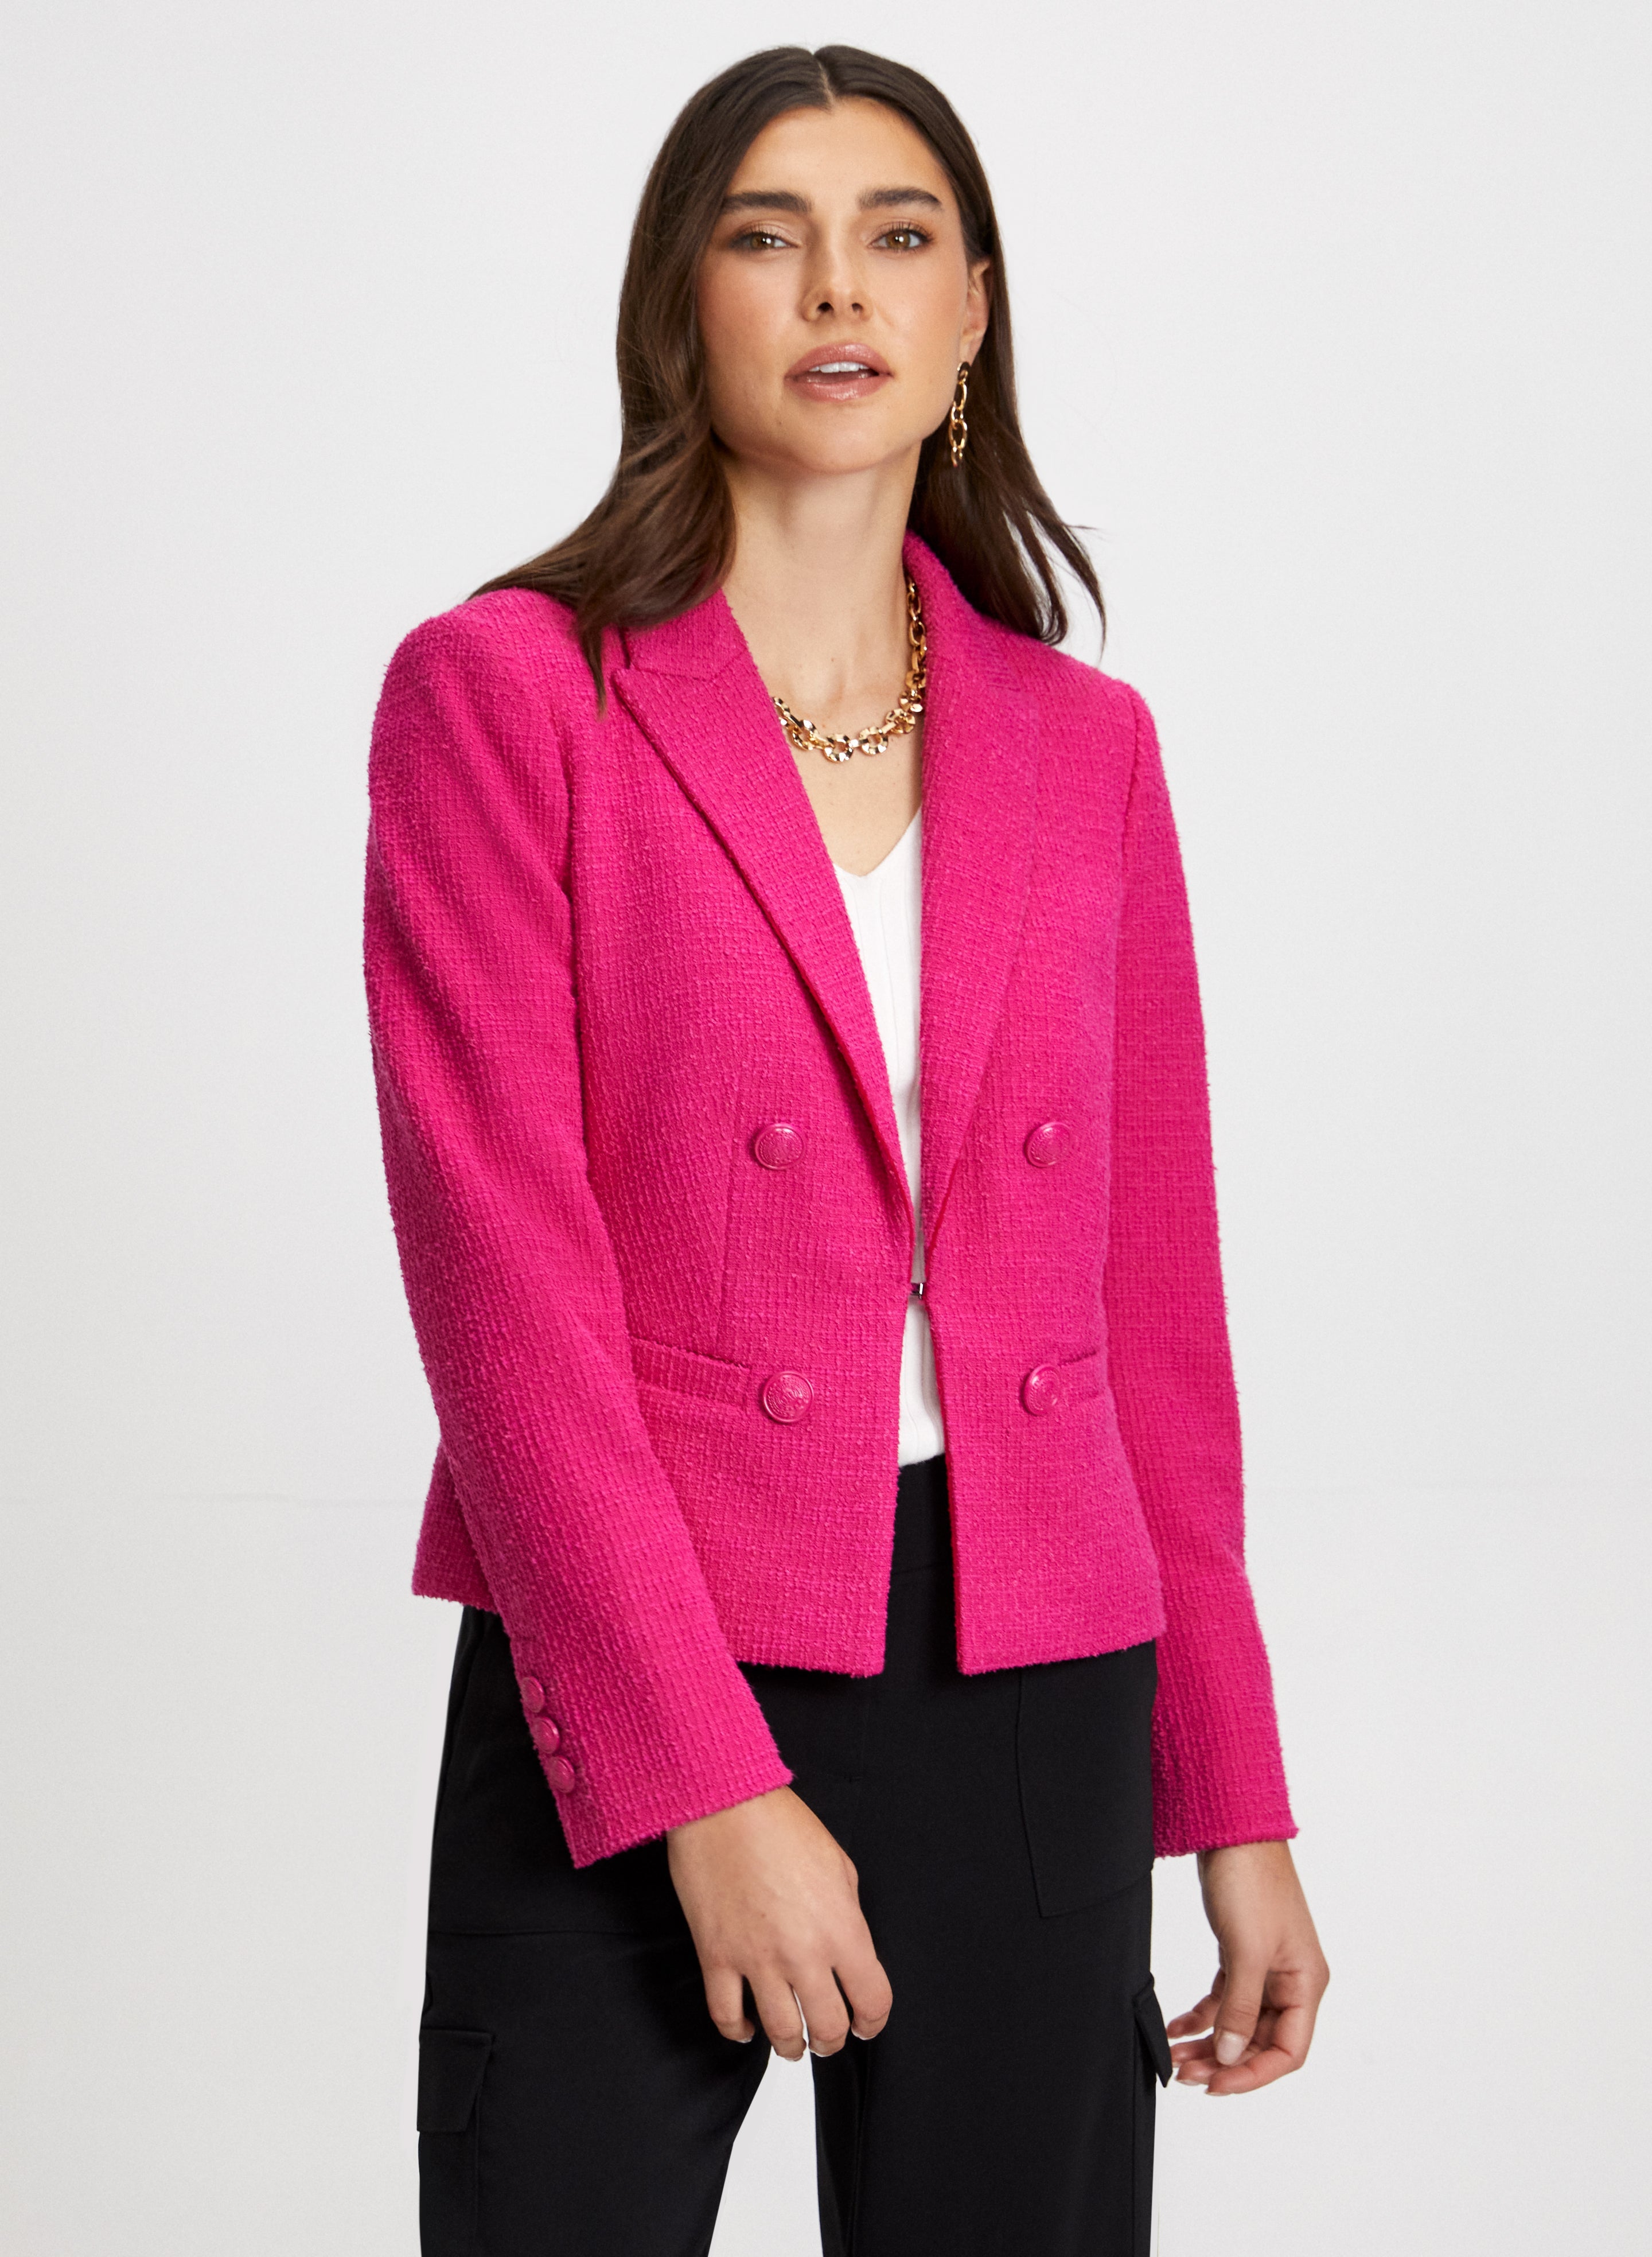 Hot Pink Blazer, Shop The Largest Collection